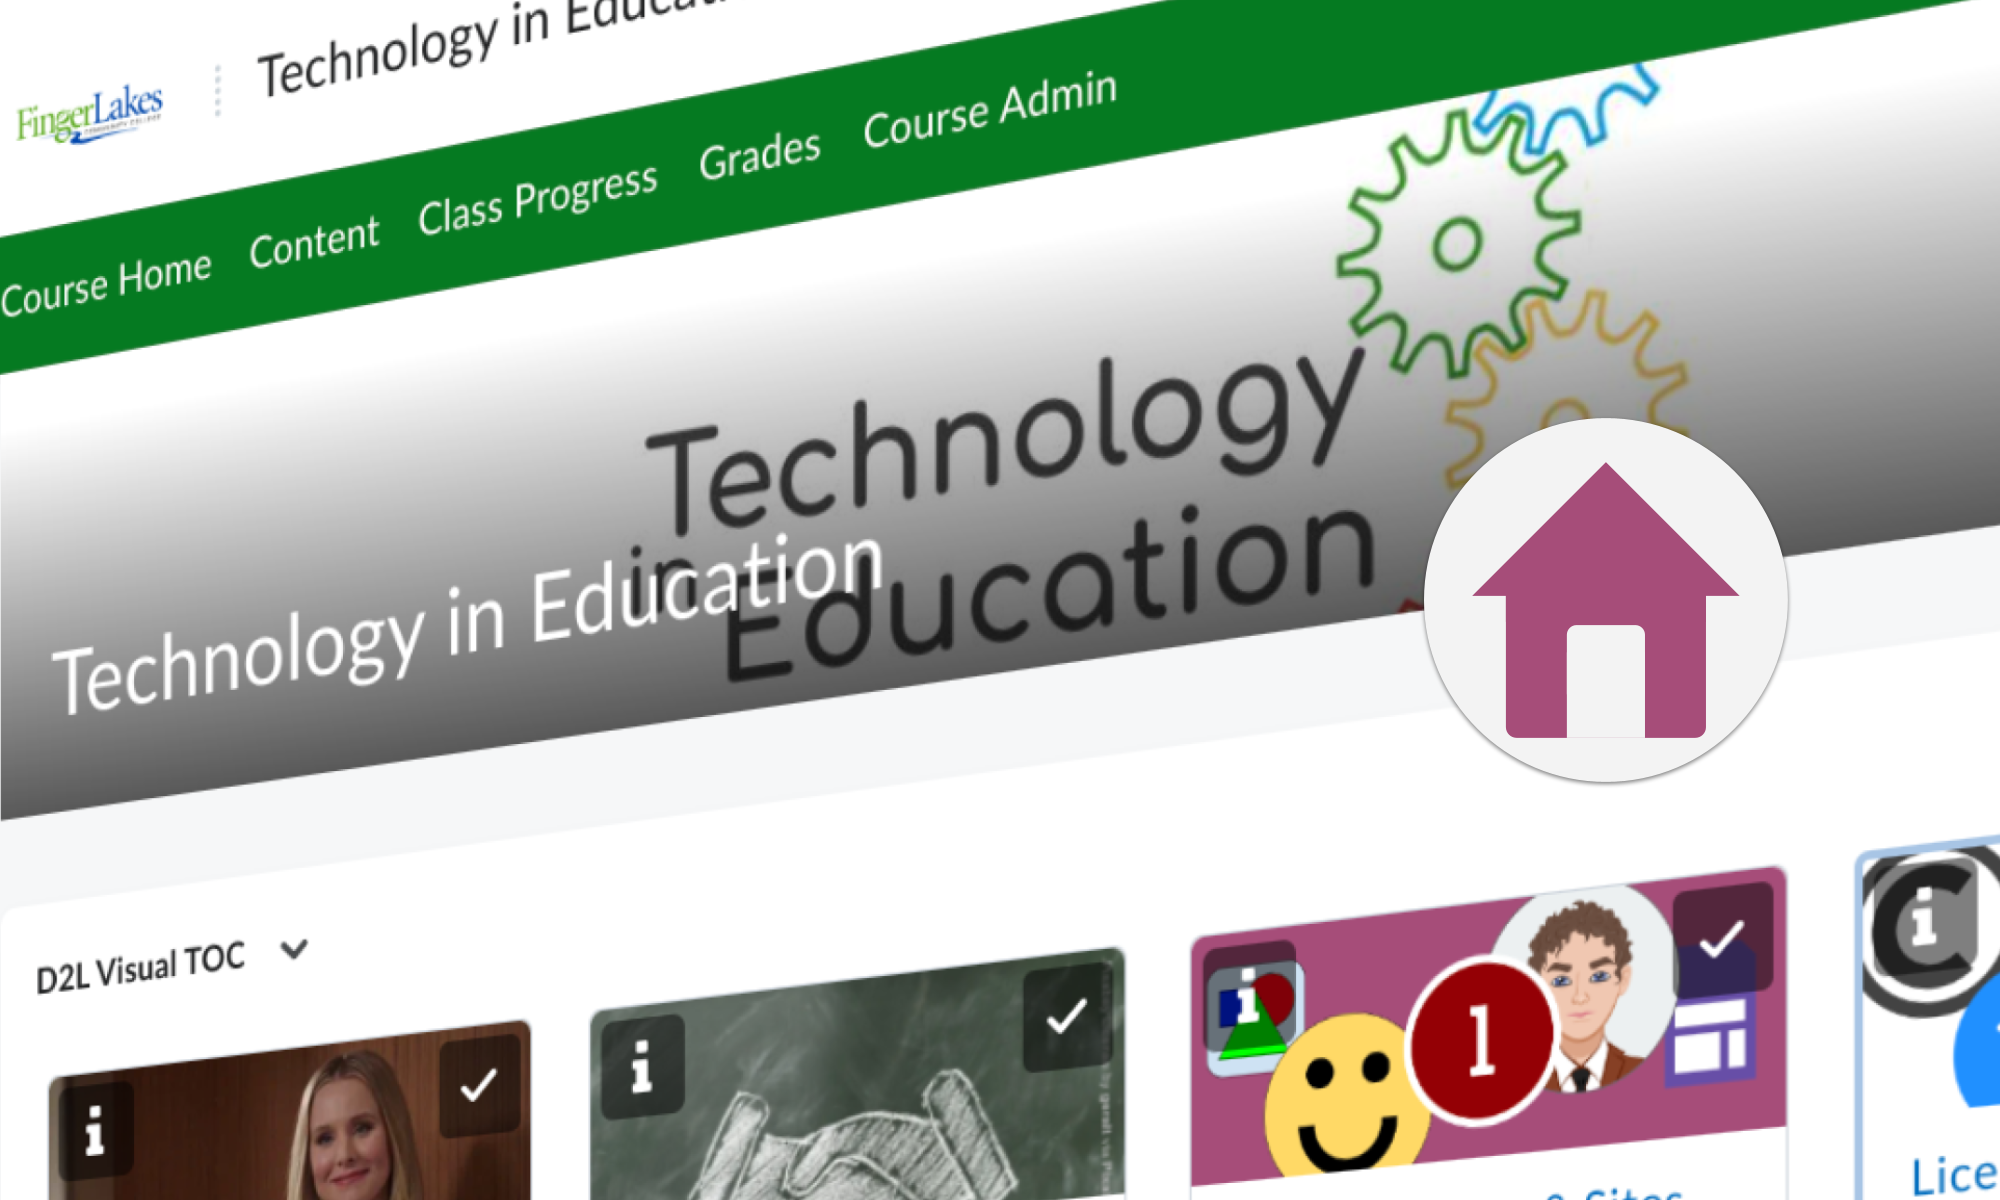 A skewed image of a course page in Brightspace. The top navigation bar is prominently displayed.